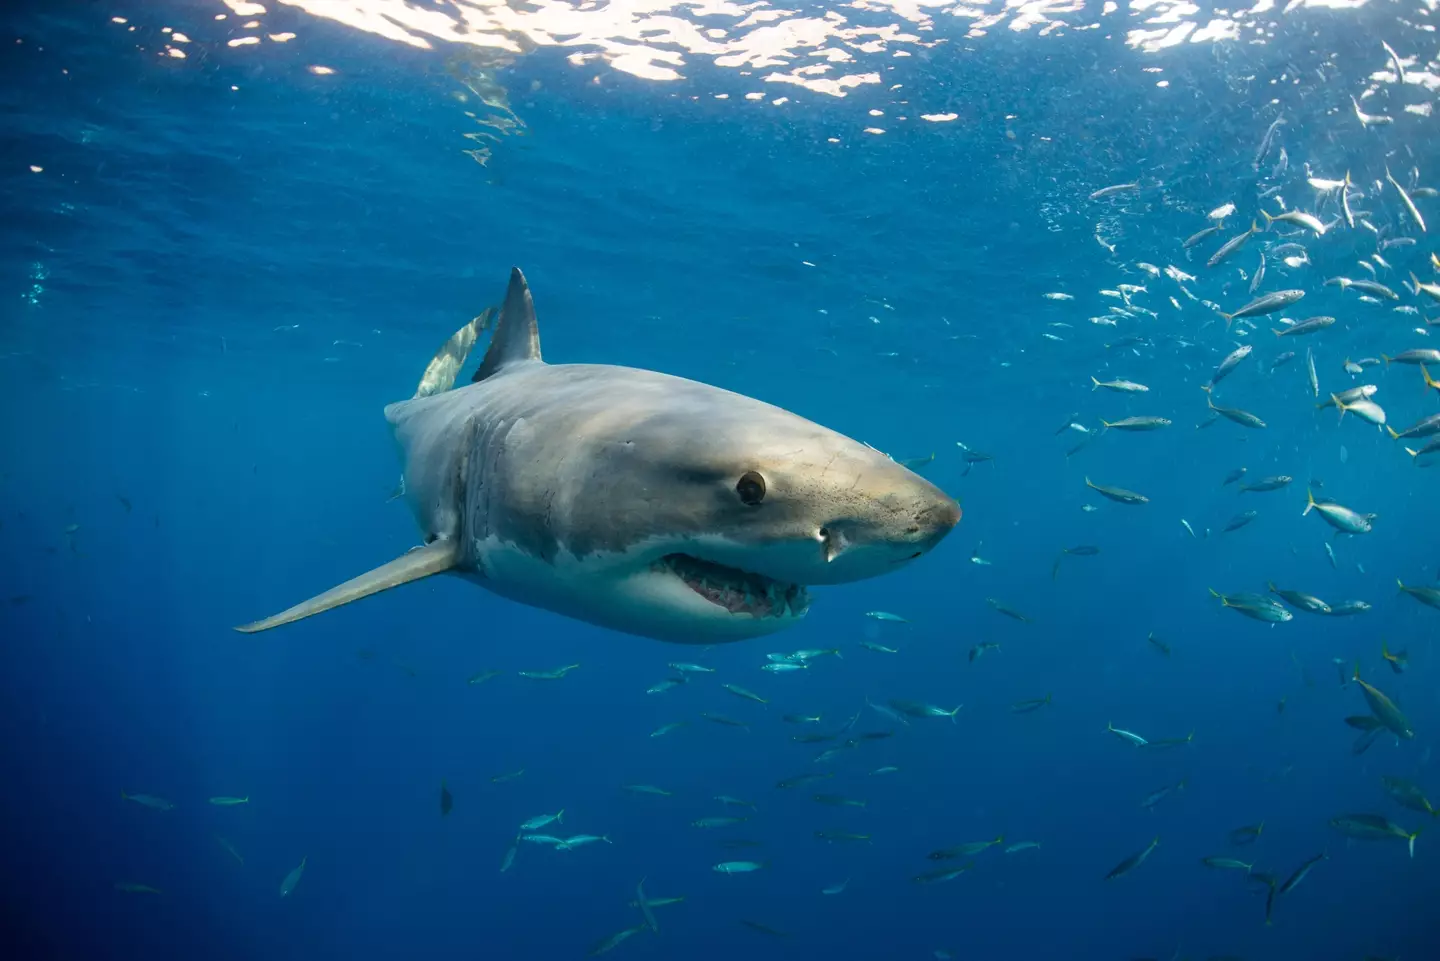 Great white sharks existed at the same time as megadolons.